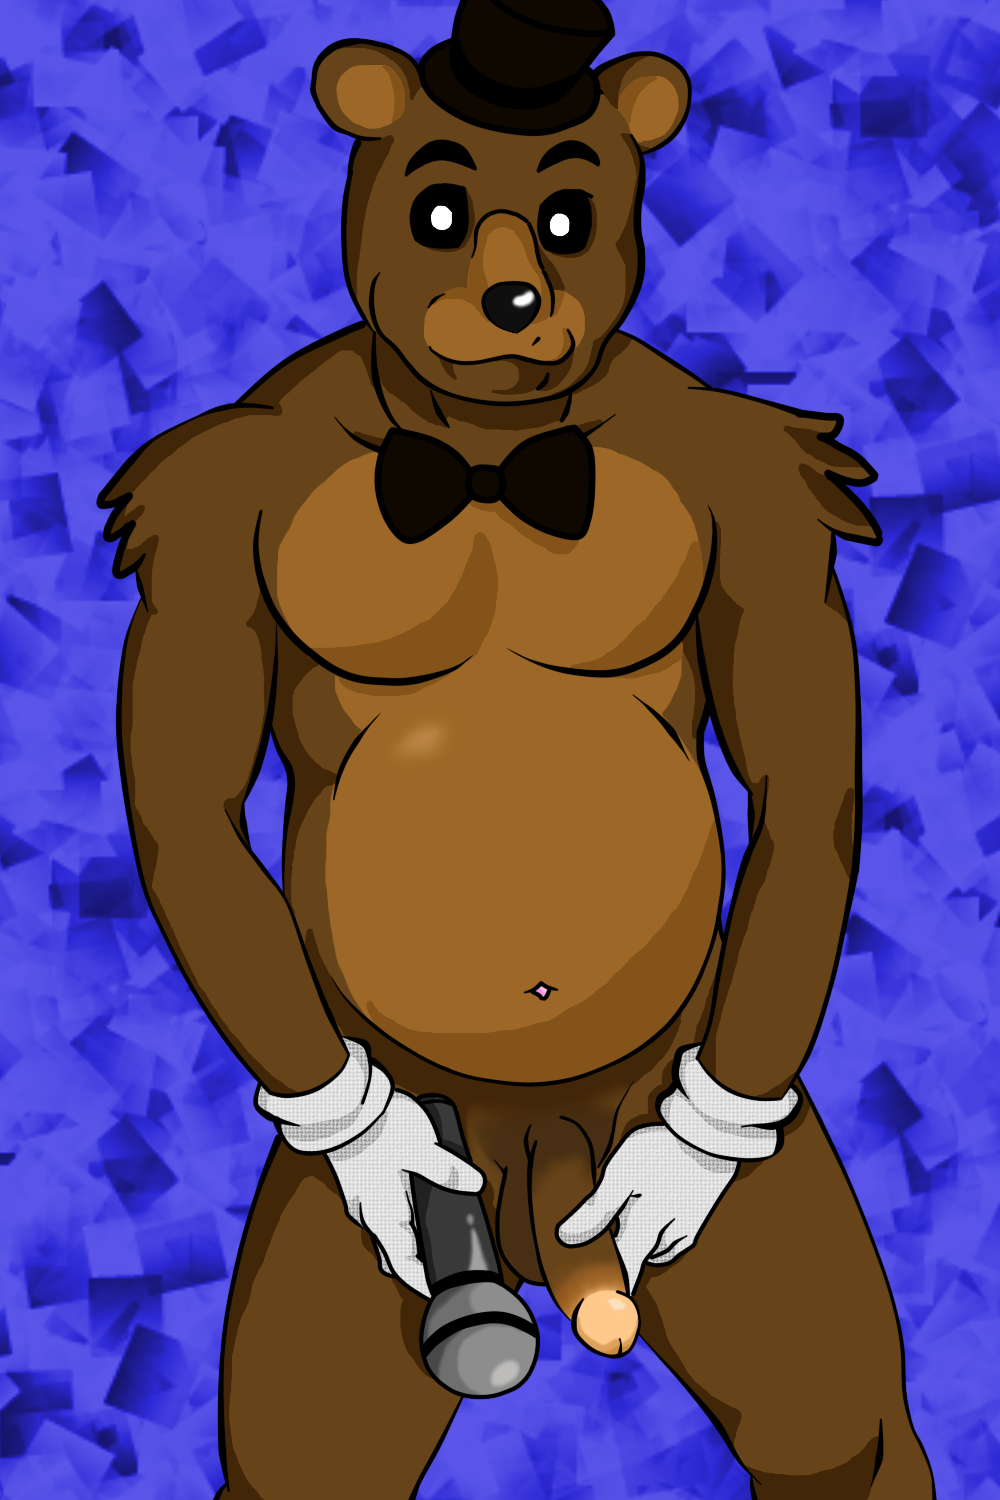 at nights freddy's nsfw five Hat in time the conductor